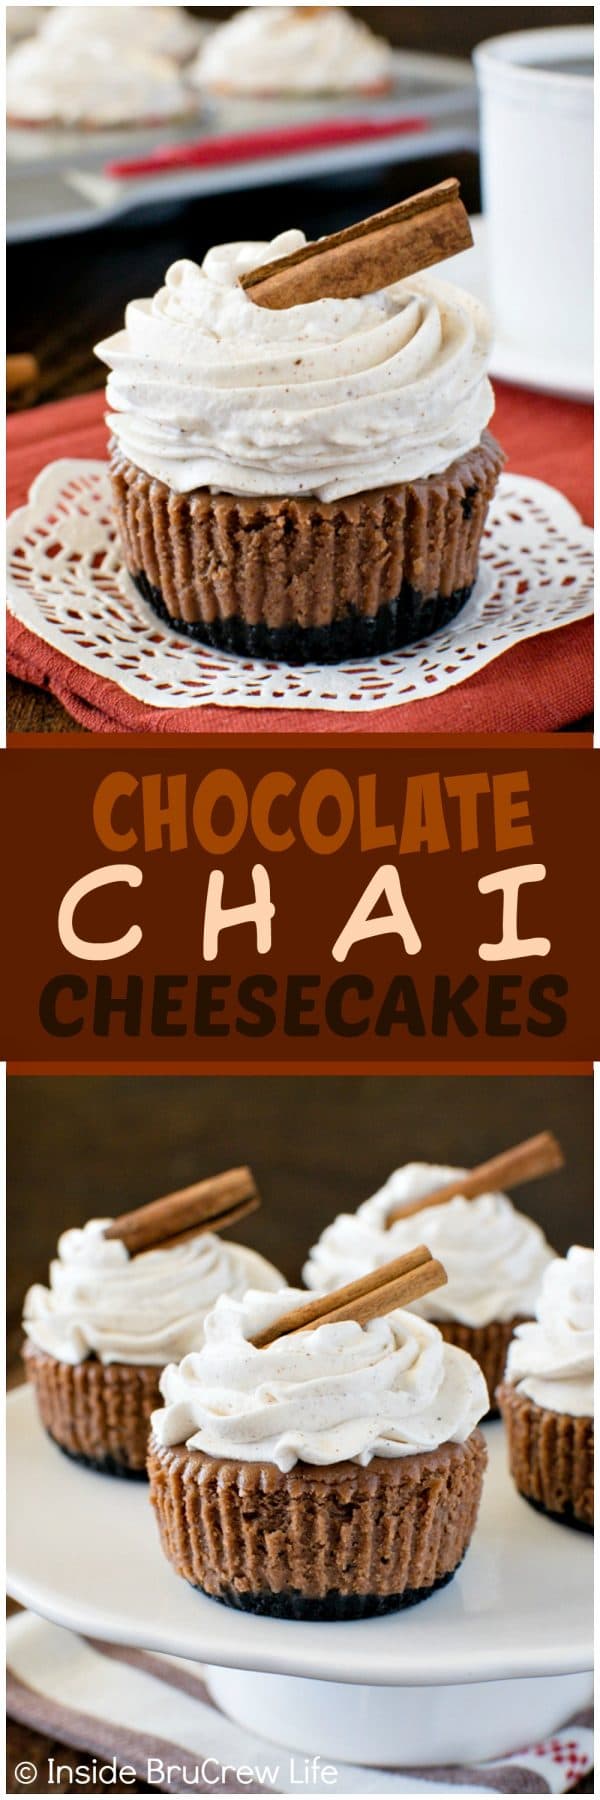 Chocolate Chai Cheesecakes - a chocolate cookie crust & a homemade spice whipped cream adds so much flavor to these mini cheesecake cupcakes. Great dessert recipe for fall parties!